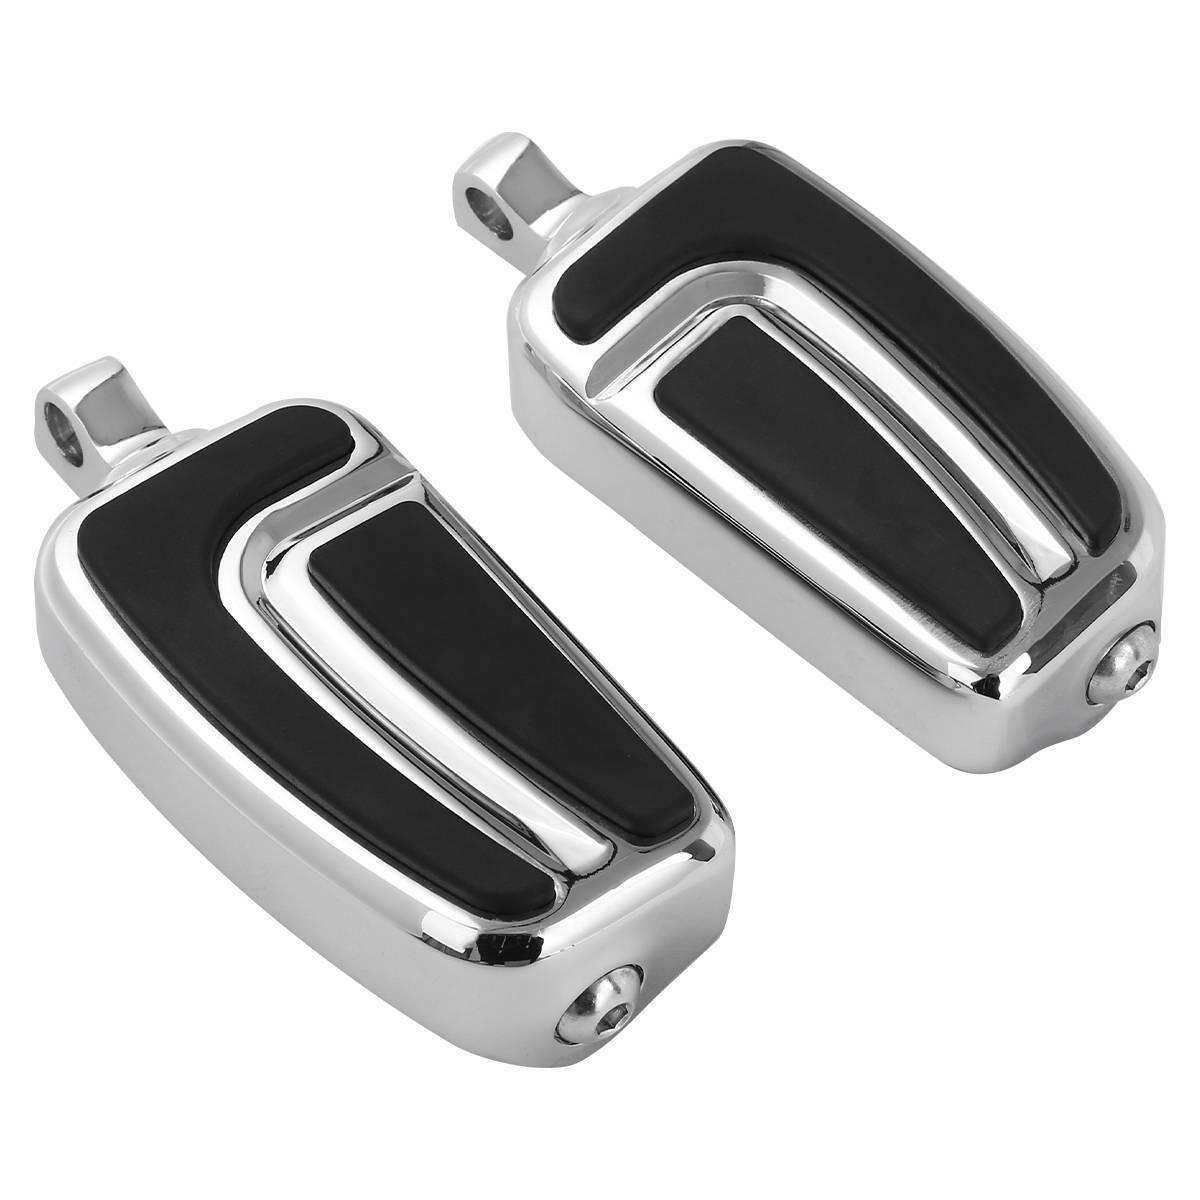 10mm Airflow Chrome Pegs Footpegs Fit For Harley Touring Road King Dyna Fat Bob - Moto Life Products